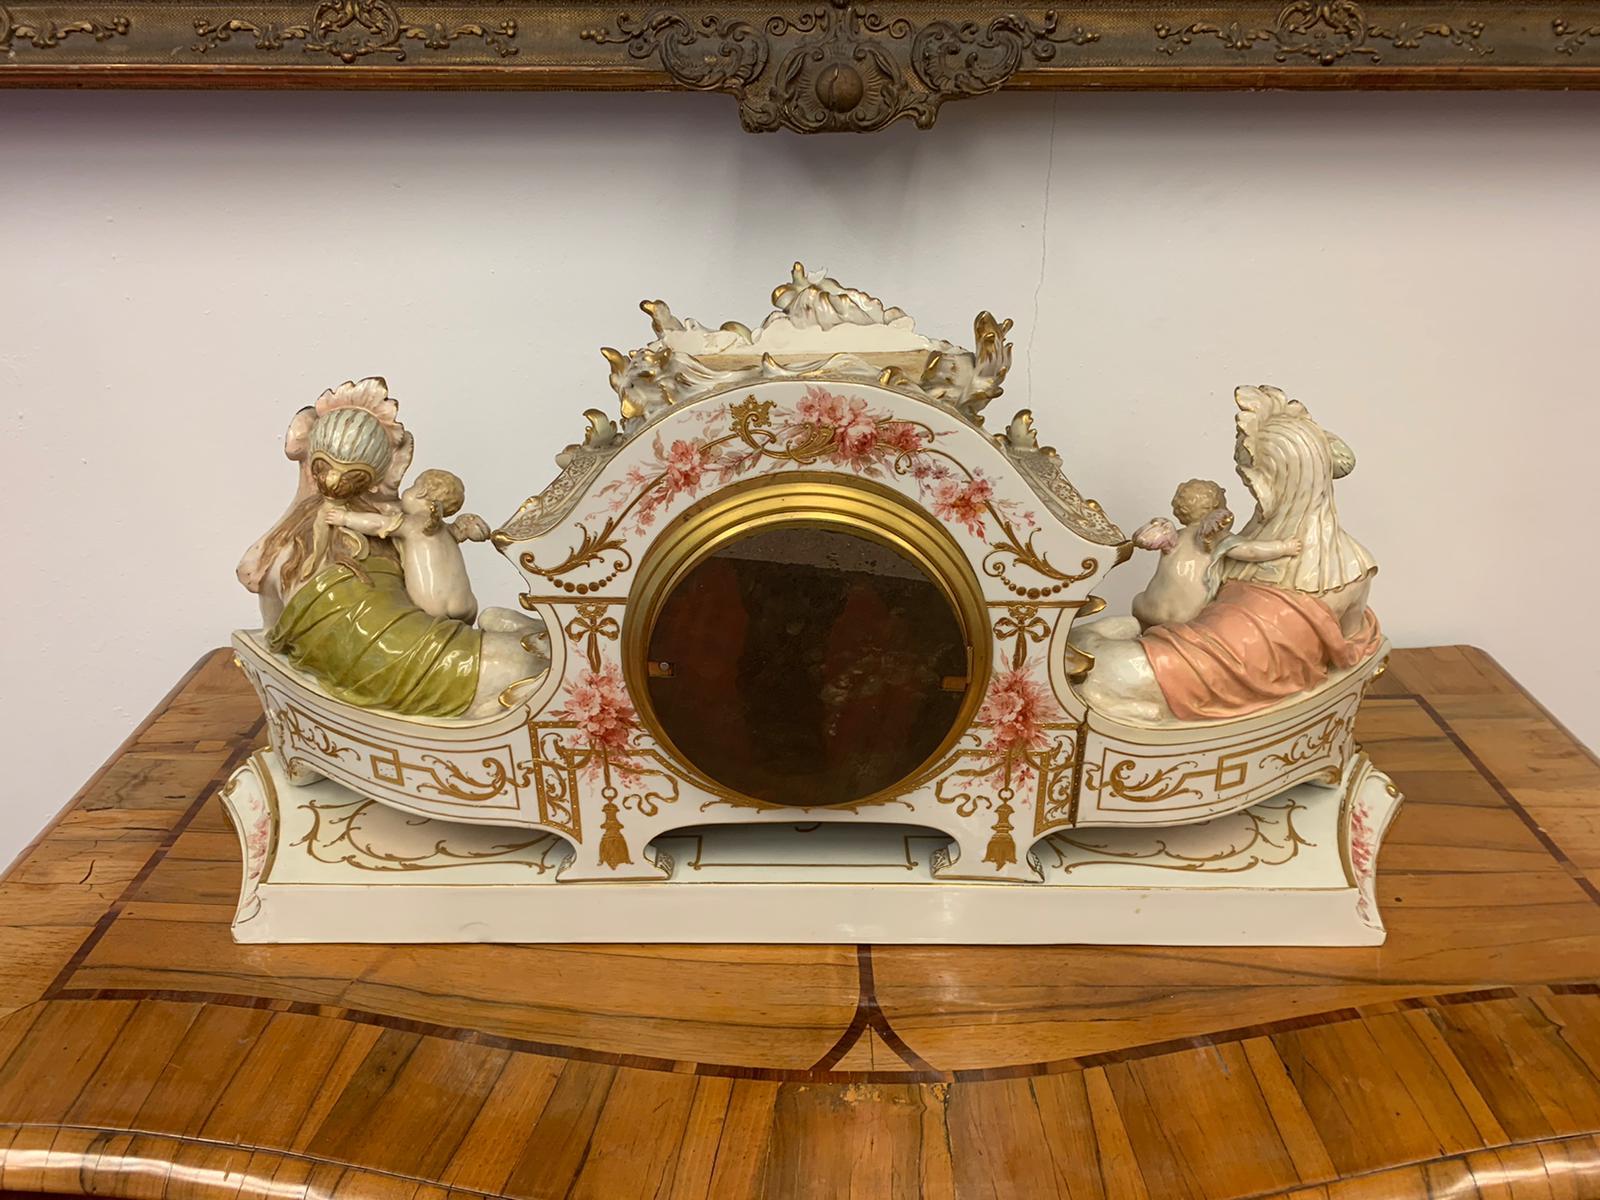 Porcelain Fireplace-Mantel Clock with Two Sphinxes and Cherubs KPM, Berlin 3